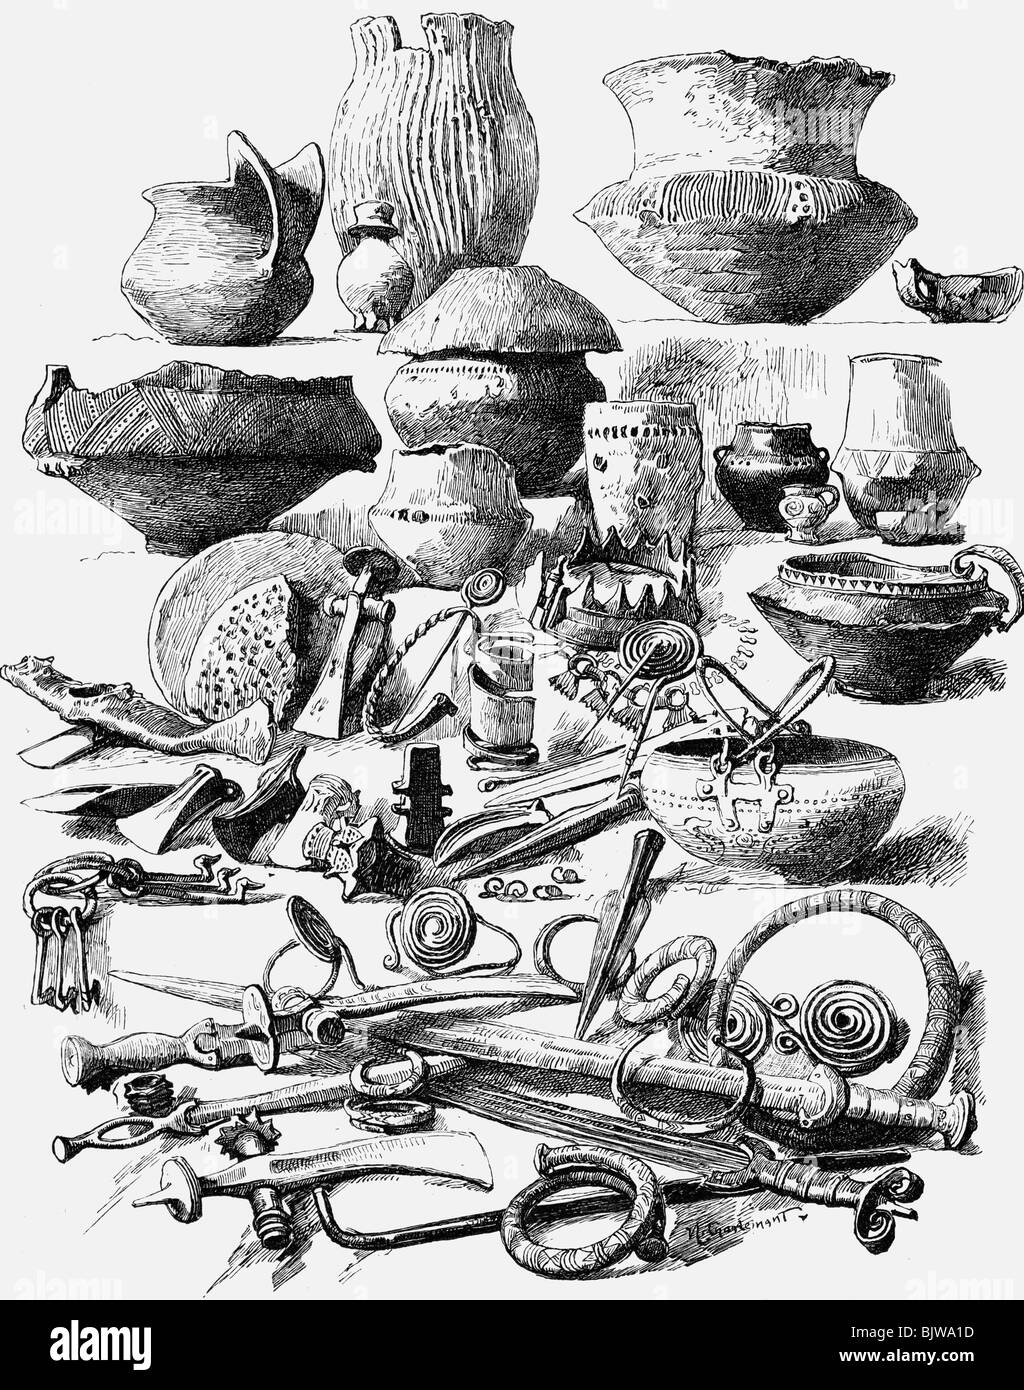 science, arceology, artefacts from the Bronze Age (circa 2200 - 1200 BC), wood engraving, Germany, 19th century, bowls, bowl, sword, swords, knife, knives, pot, pots, necklace, prehistory, armlet, prehistoric, historic, historical, ancient world, Stock Photo